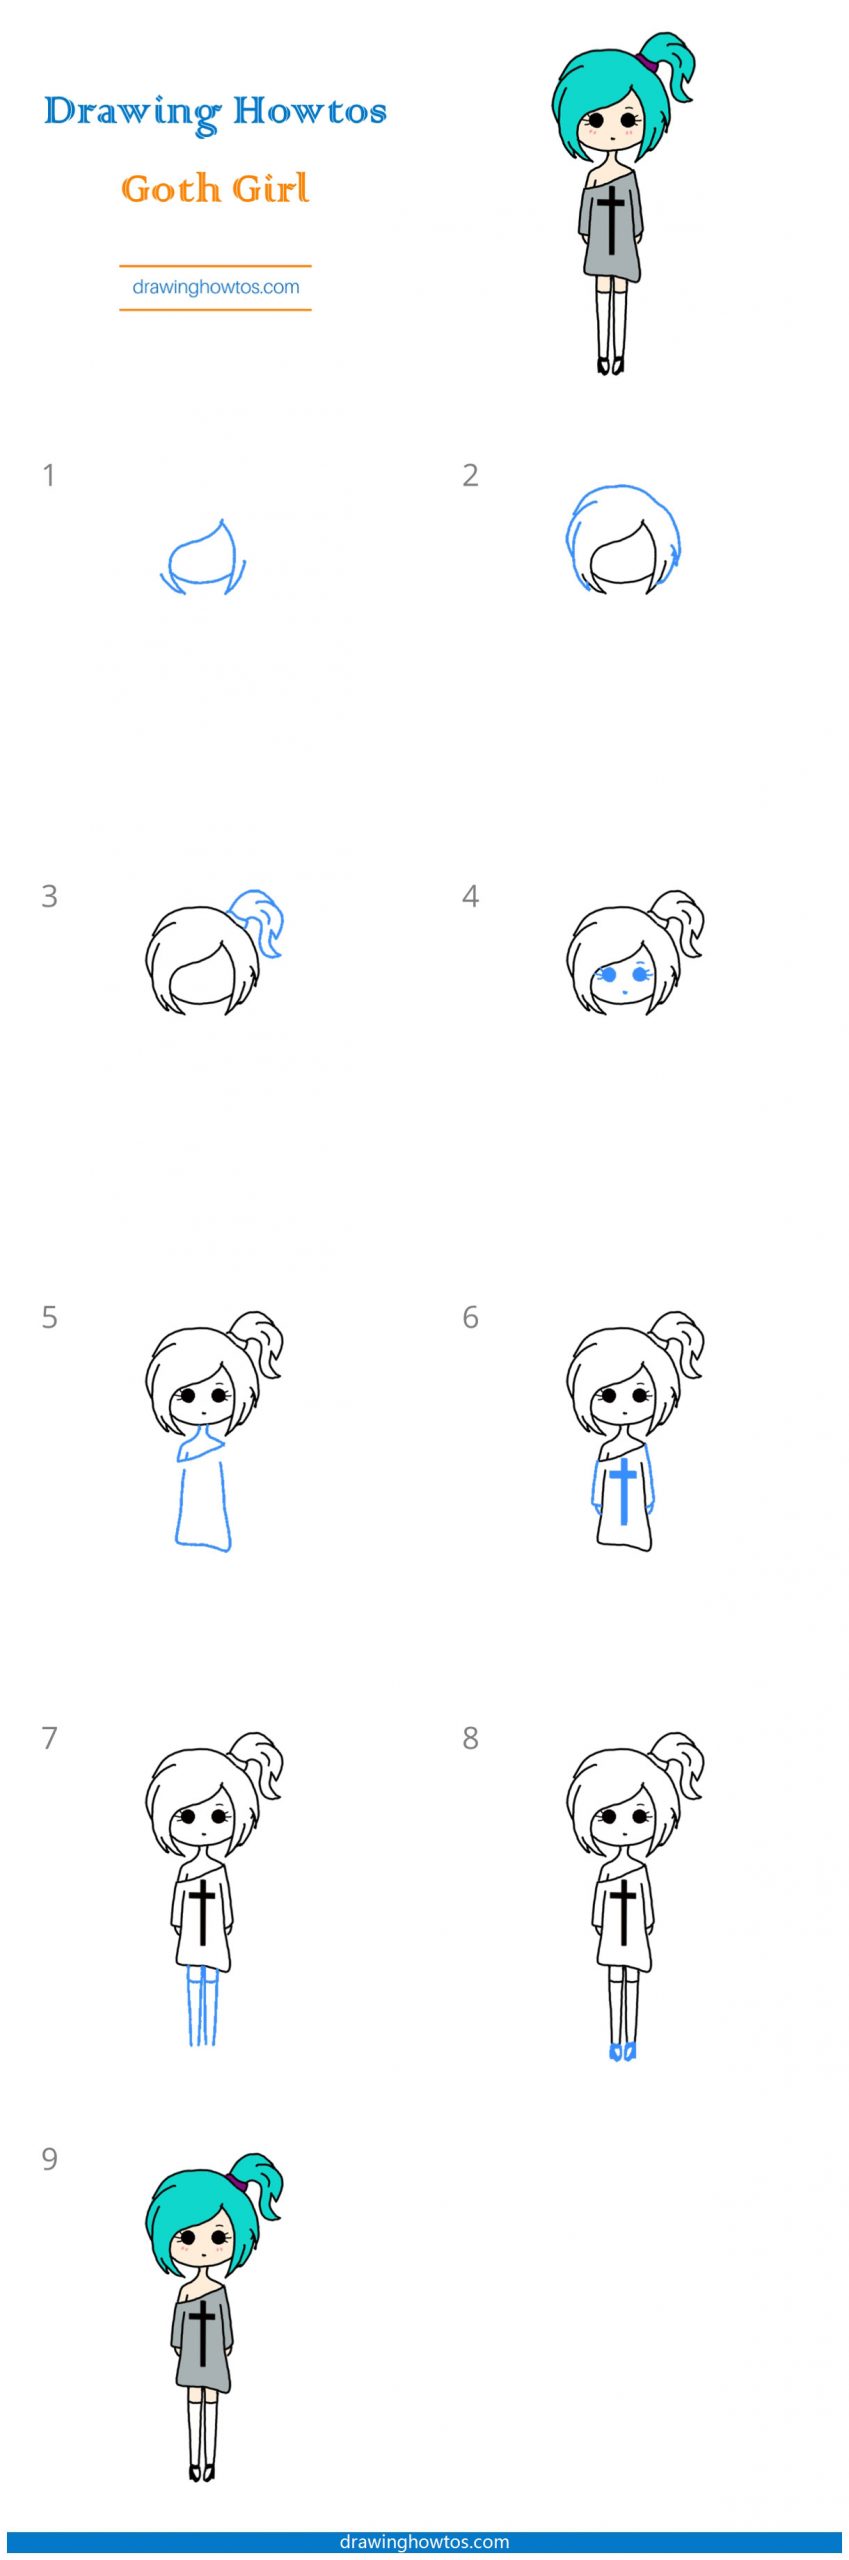 How to Draw a Cartoon Goth Girl Step by Step